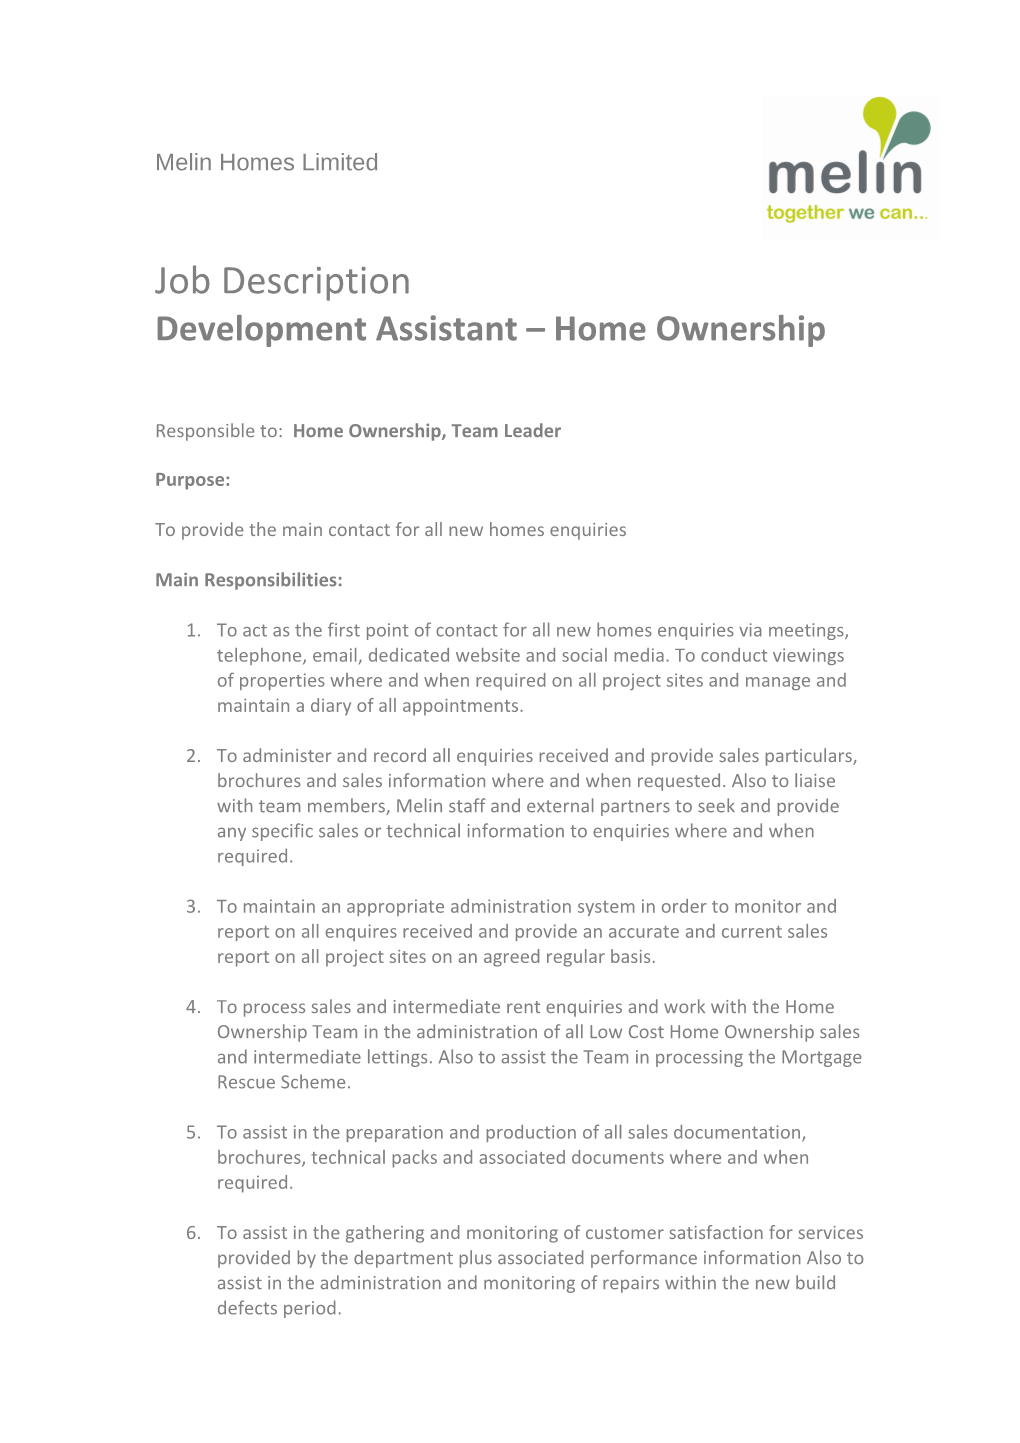 Development Assistant Home Ownership